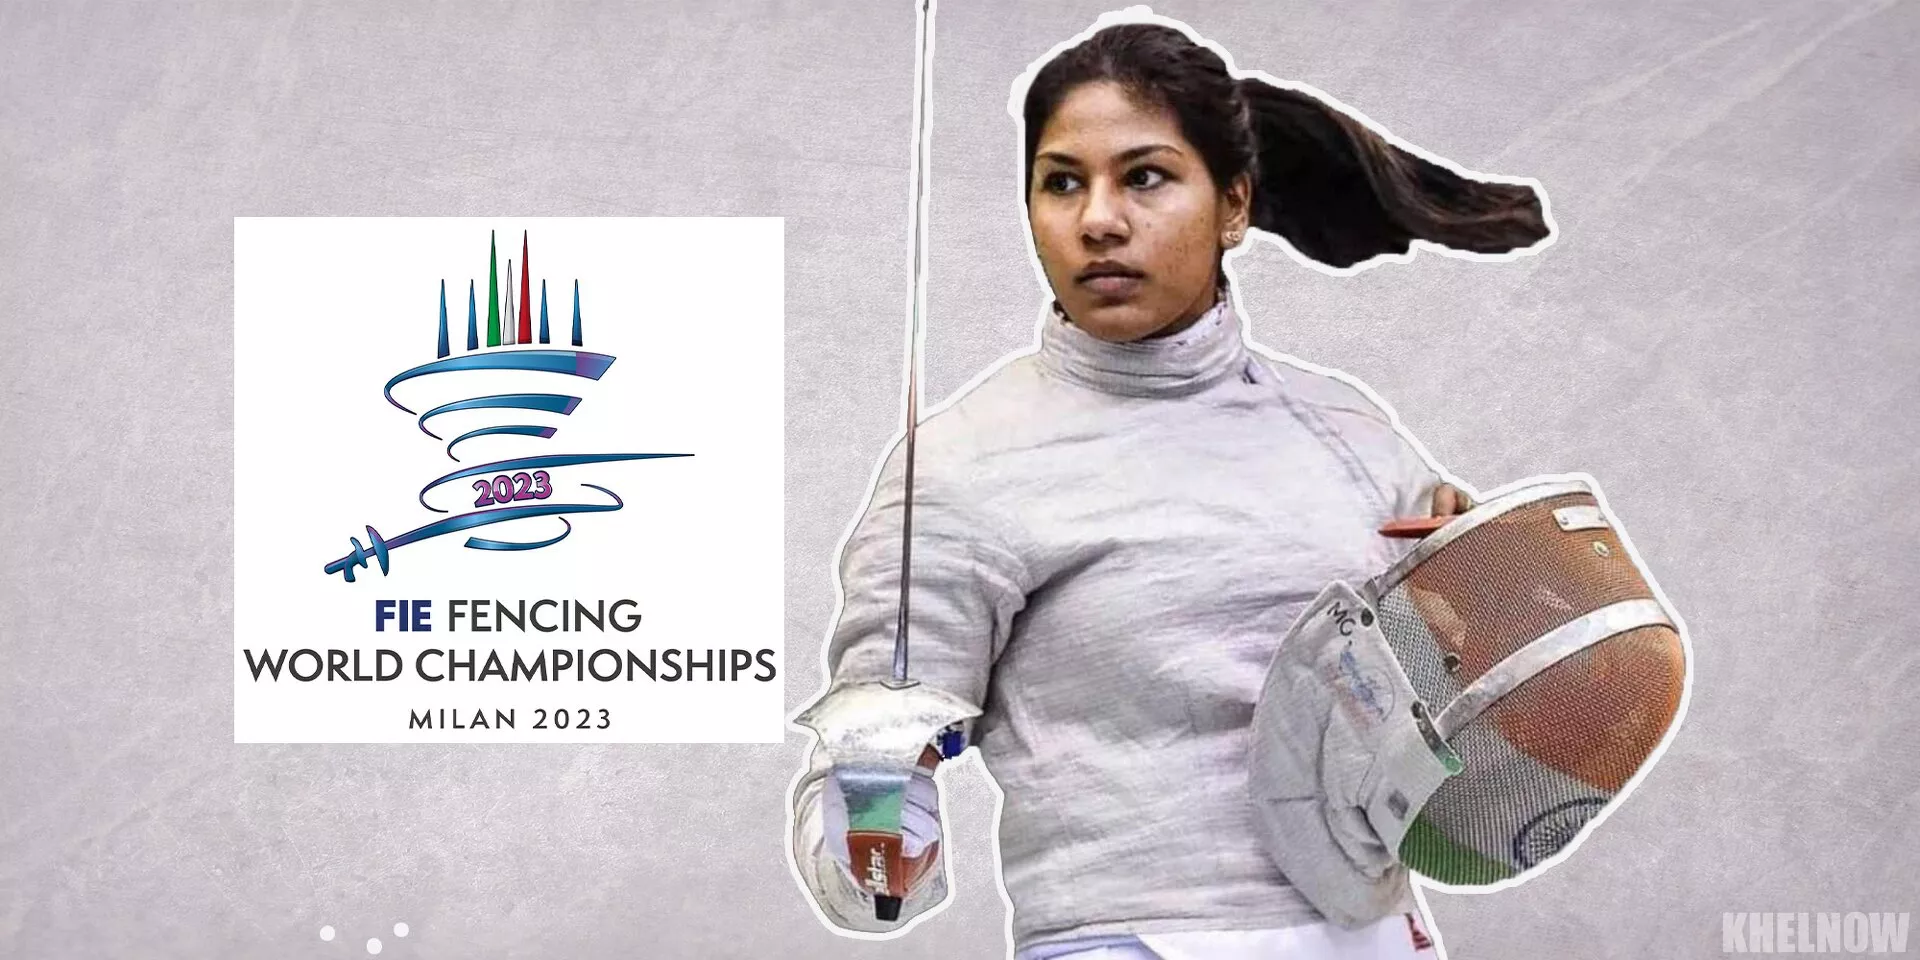 World Fencing Championships 2023 Updated Schedule, fixtures, results and live streaming details